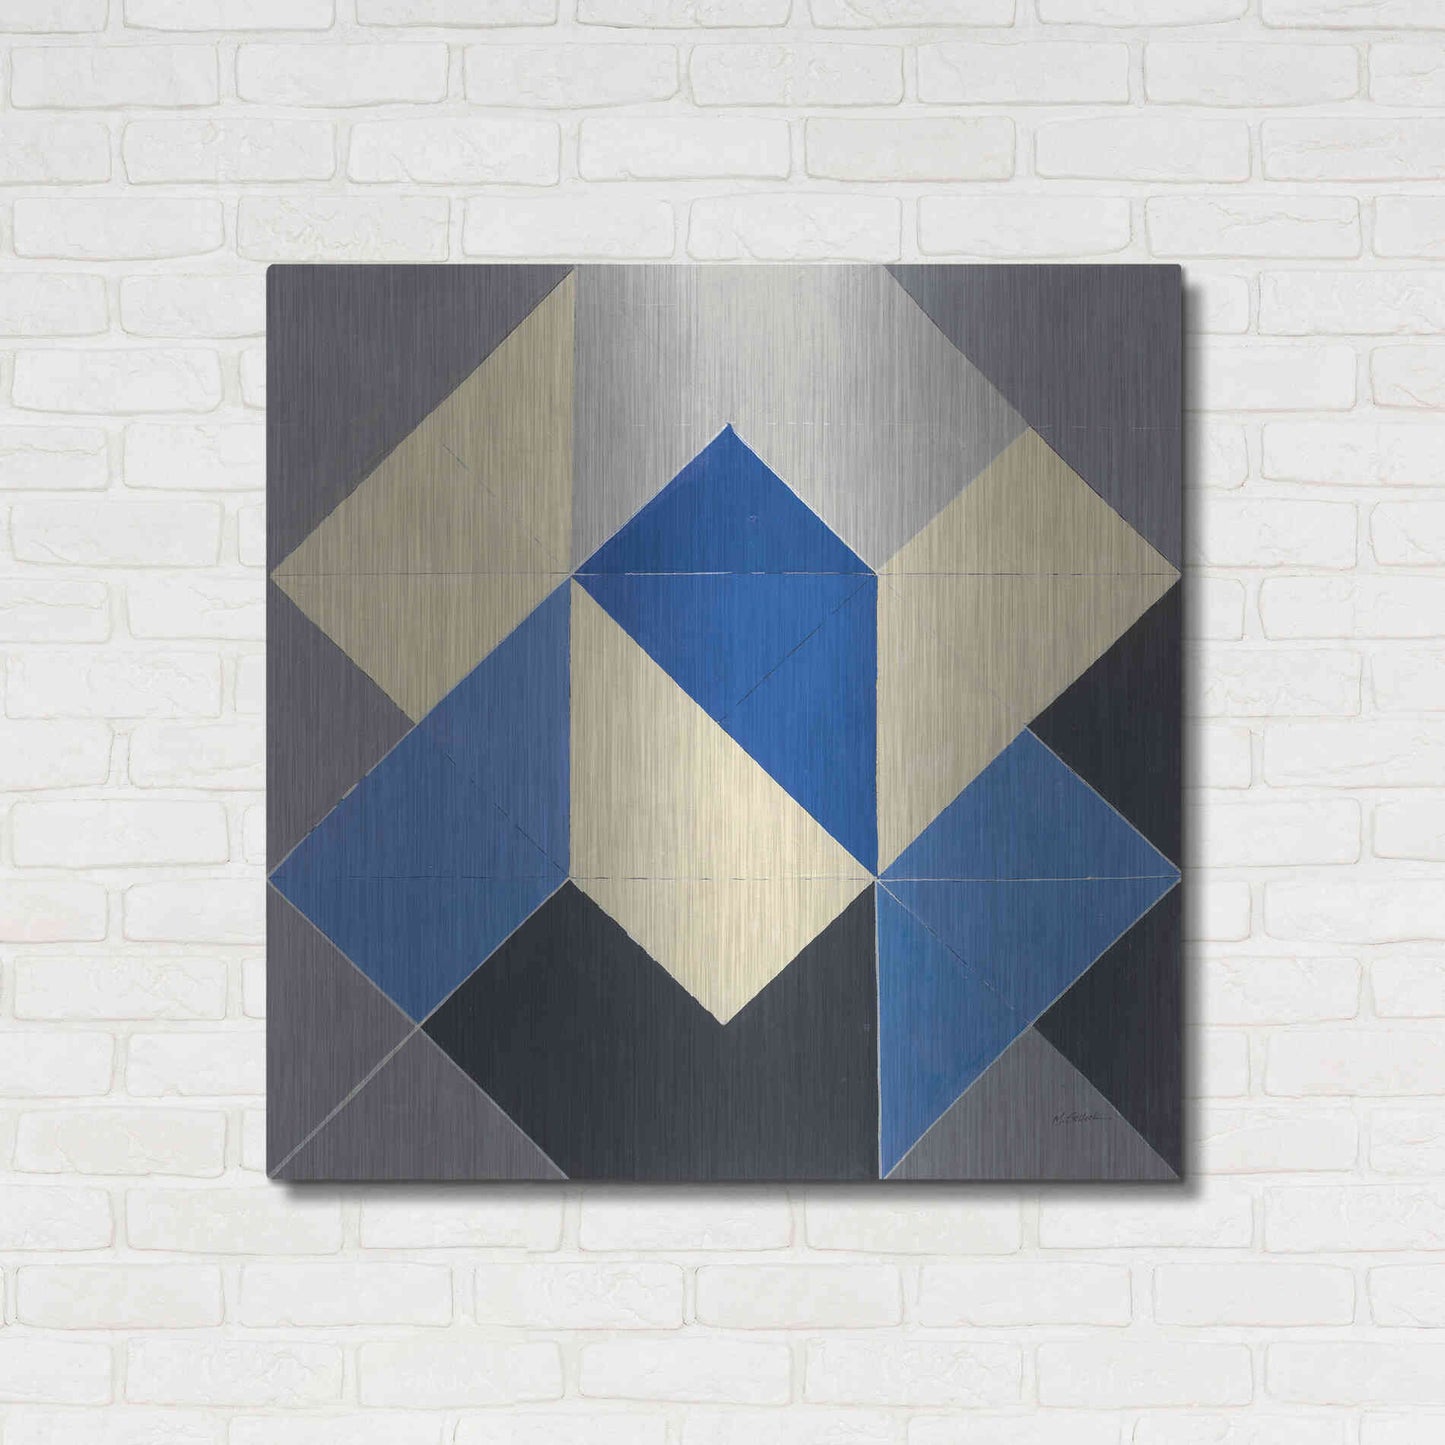 Luxe Metal Art 'Triangles IV' by Mike Schick, Metal Wall Art,36x36